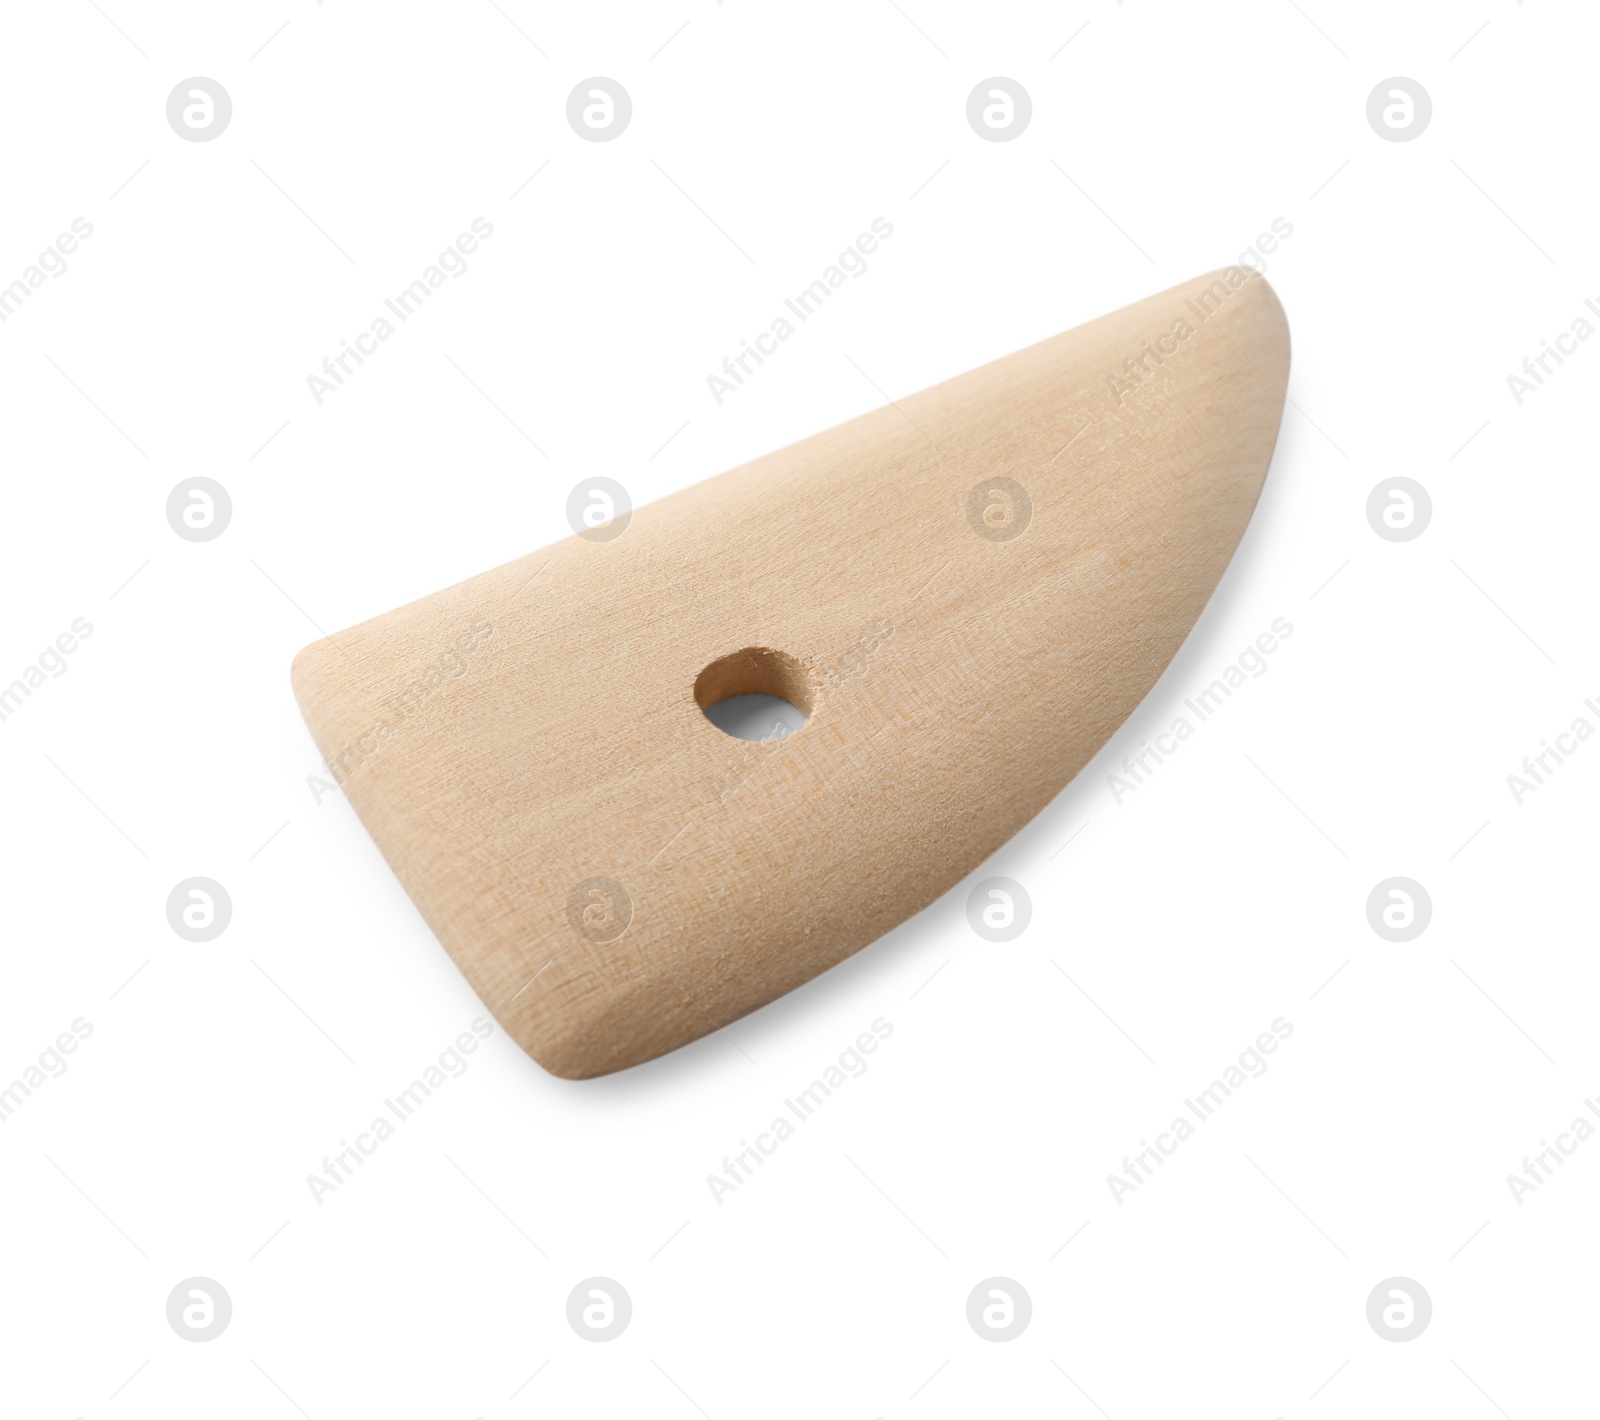 Photo of Wooden rib for clay modeling isolated on white